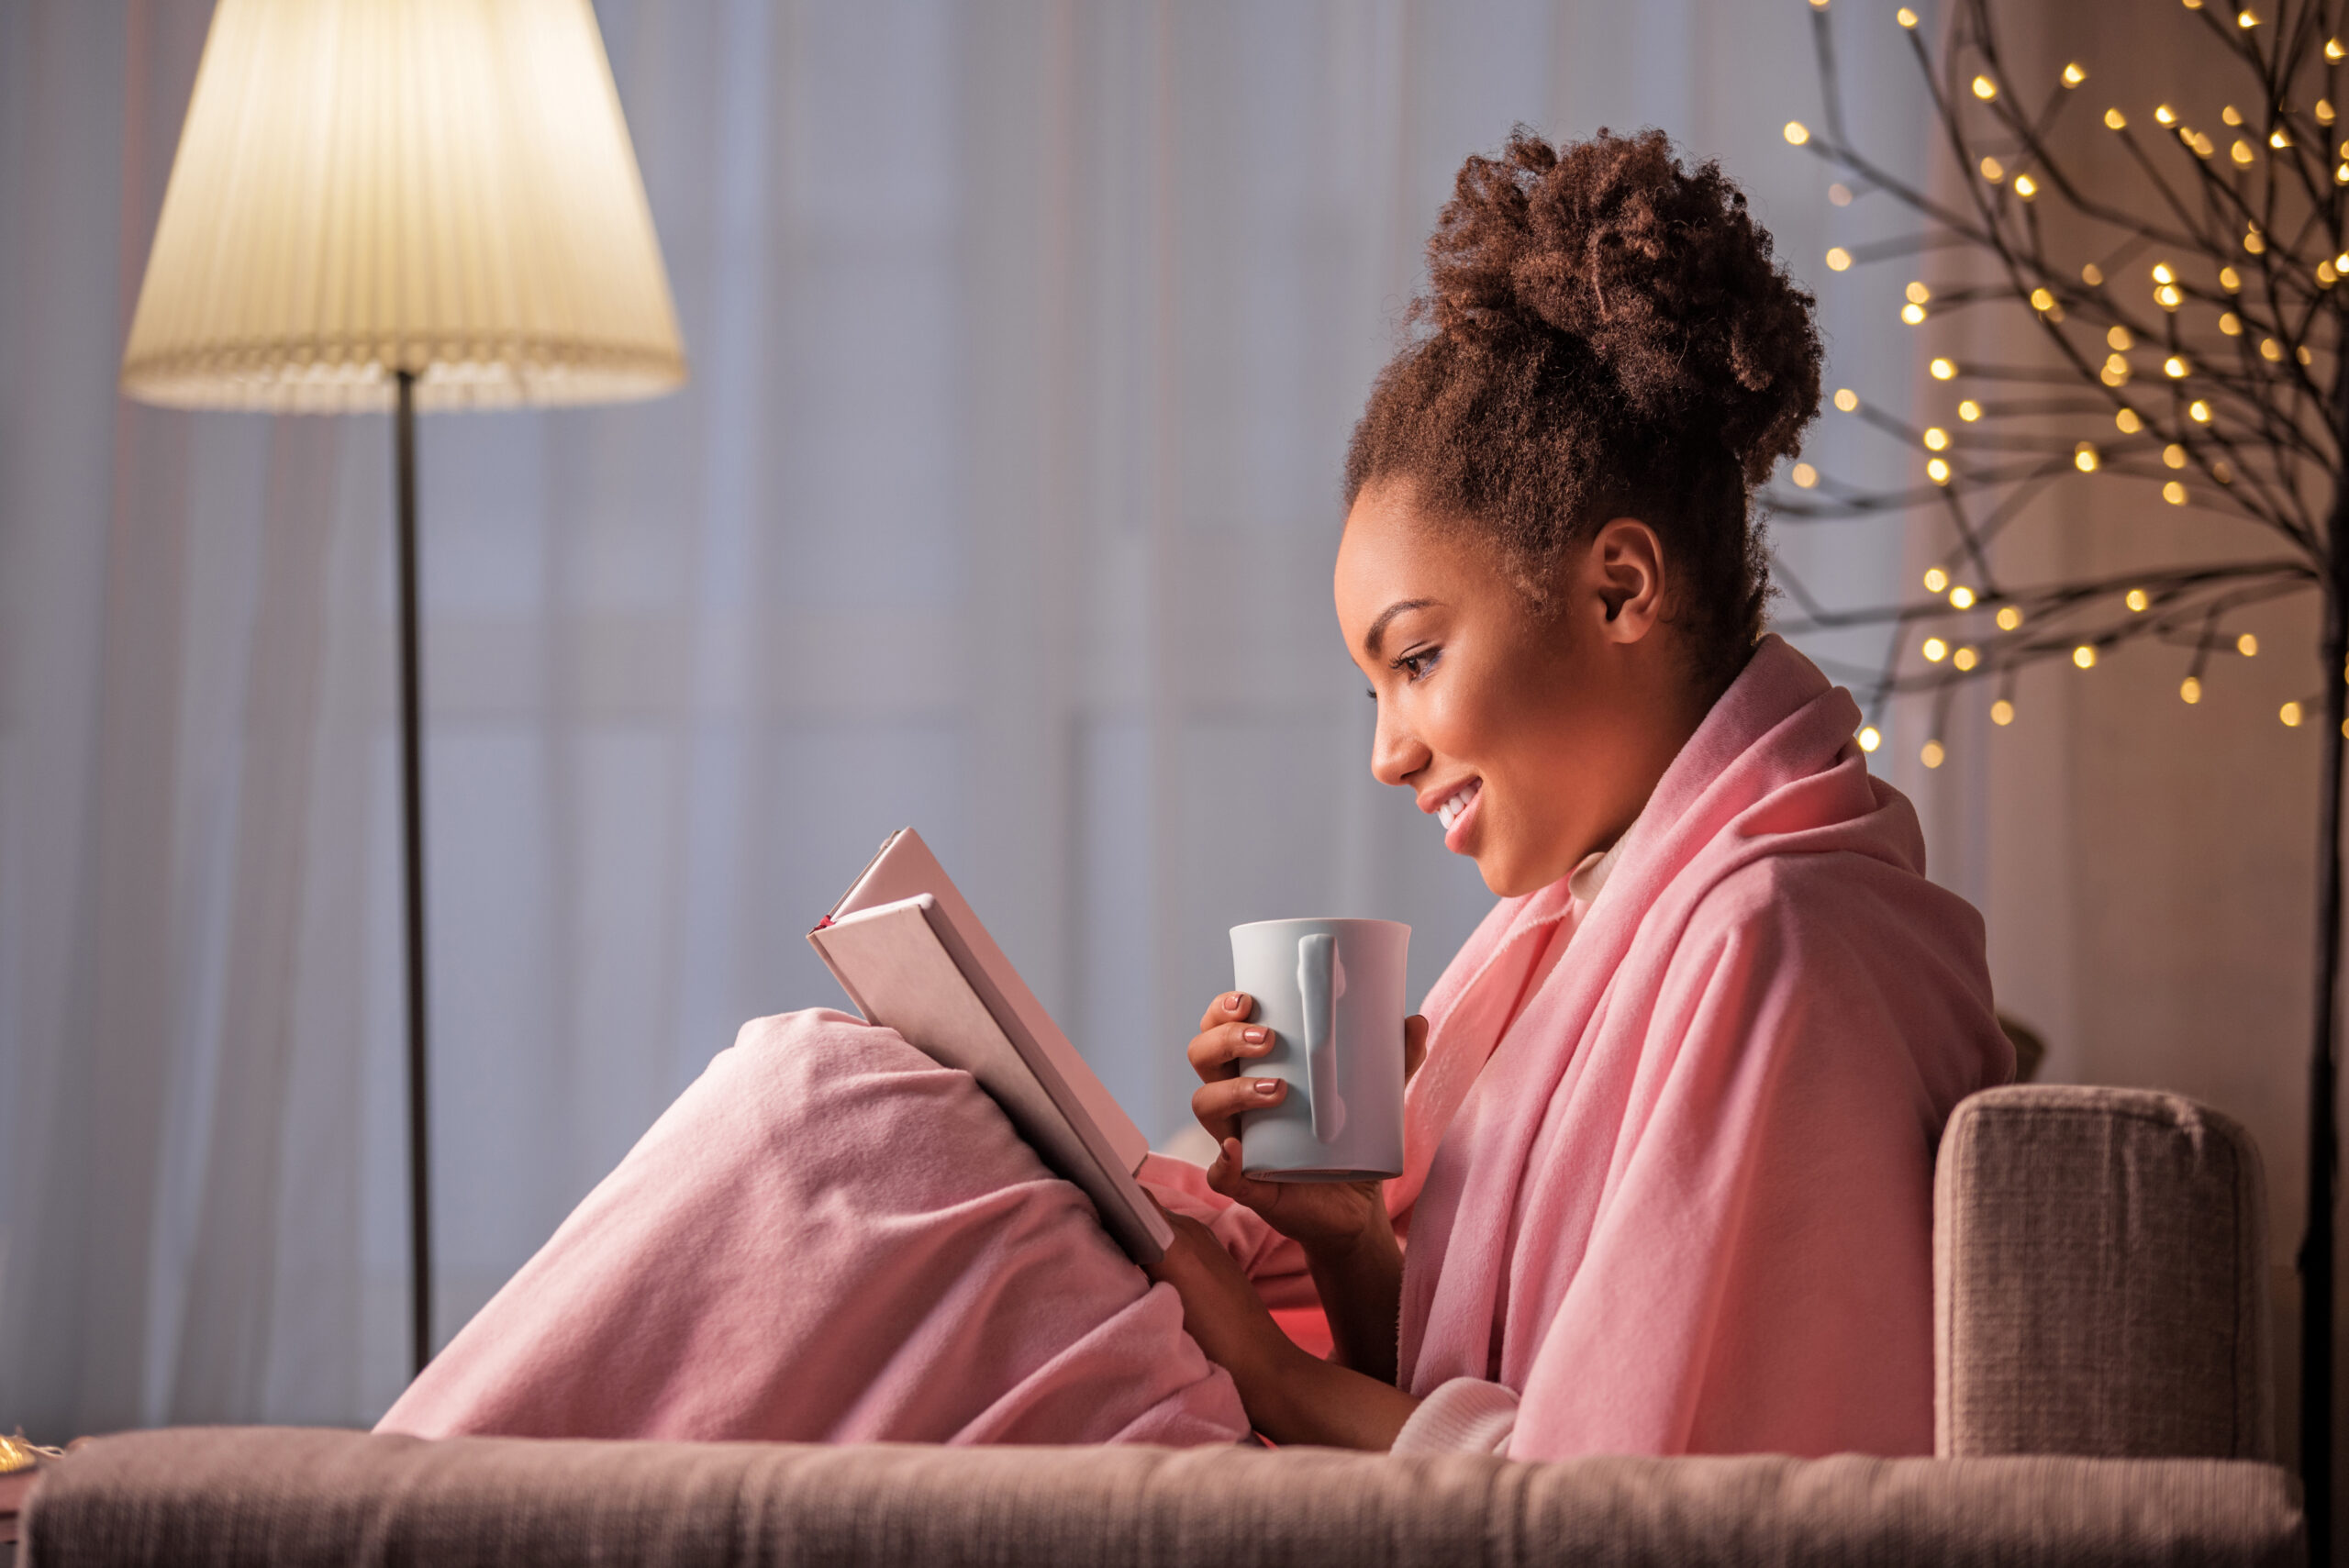 Woman with brown hair and a pink blanket reading on a book image of new podcast episode of Harvesting Happiness Talk Radio about dissonance, fear and peace with Panache Desai & Humble the Poet